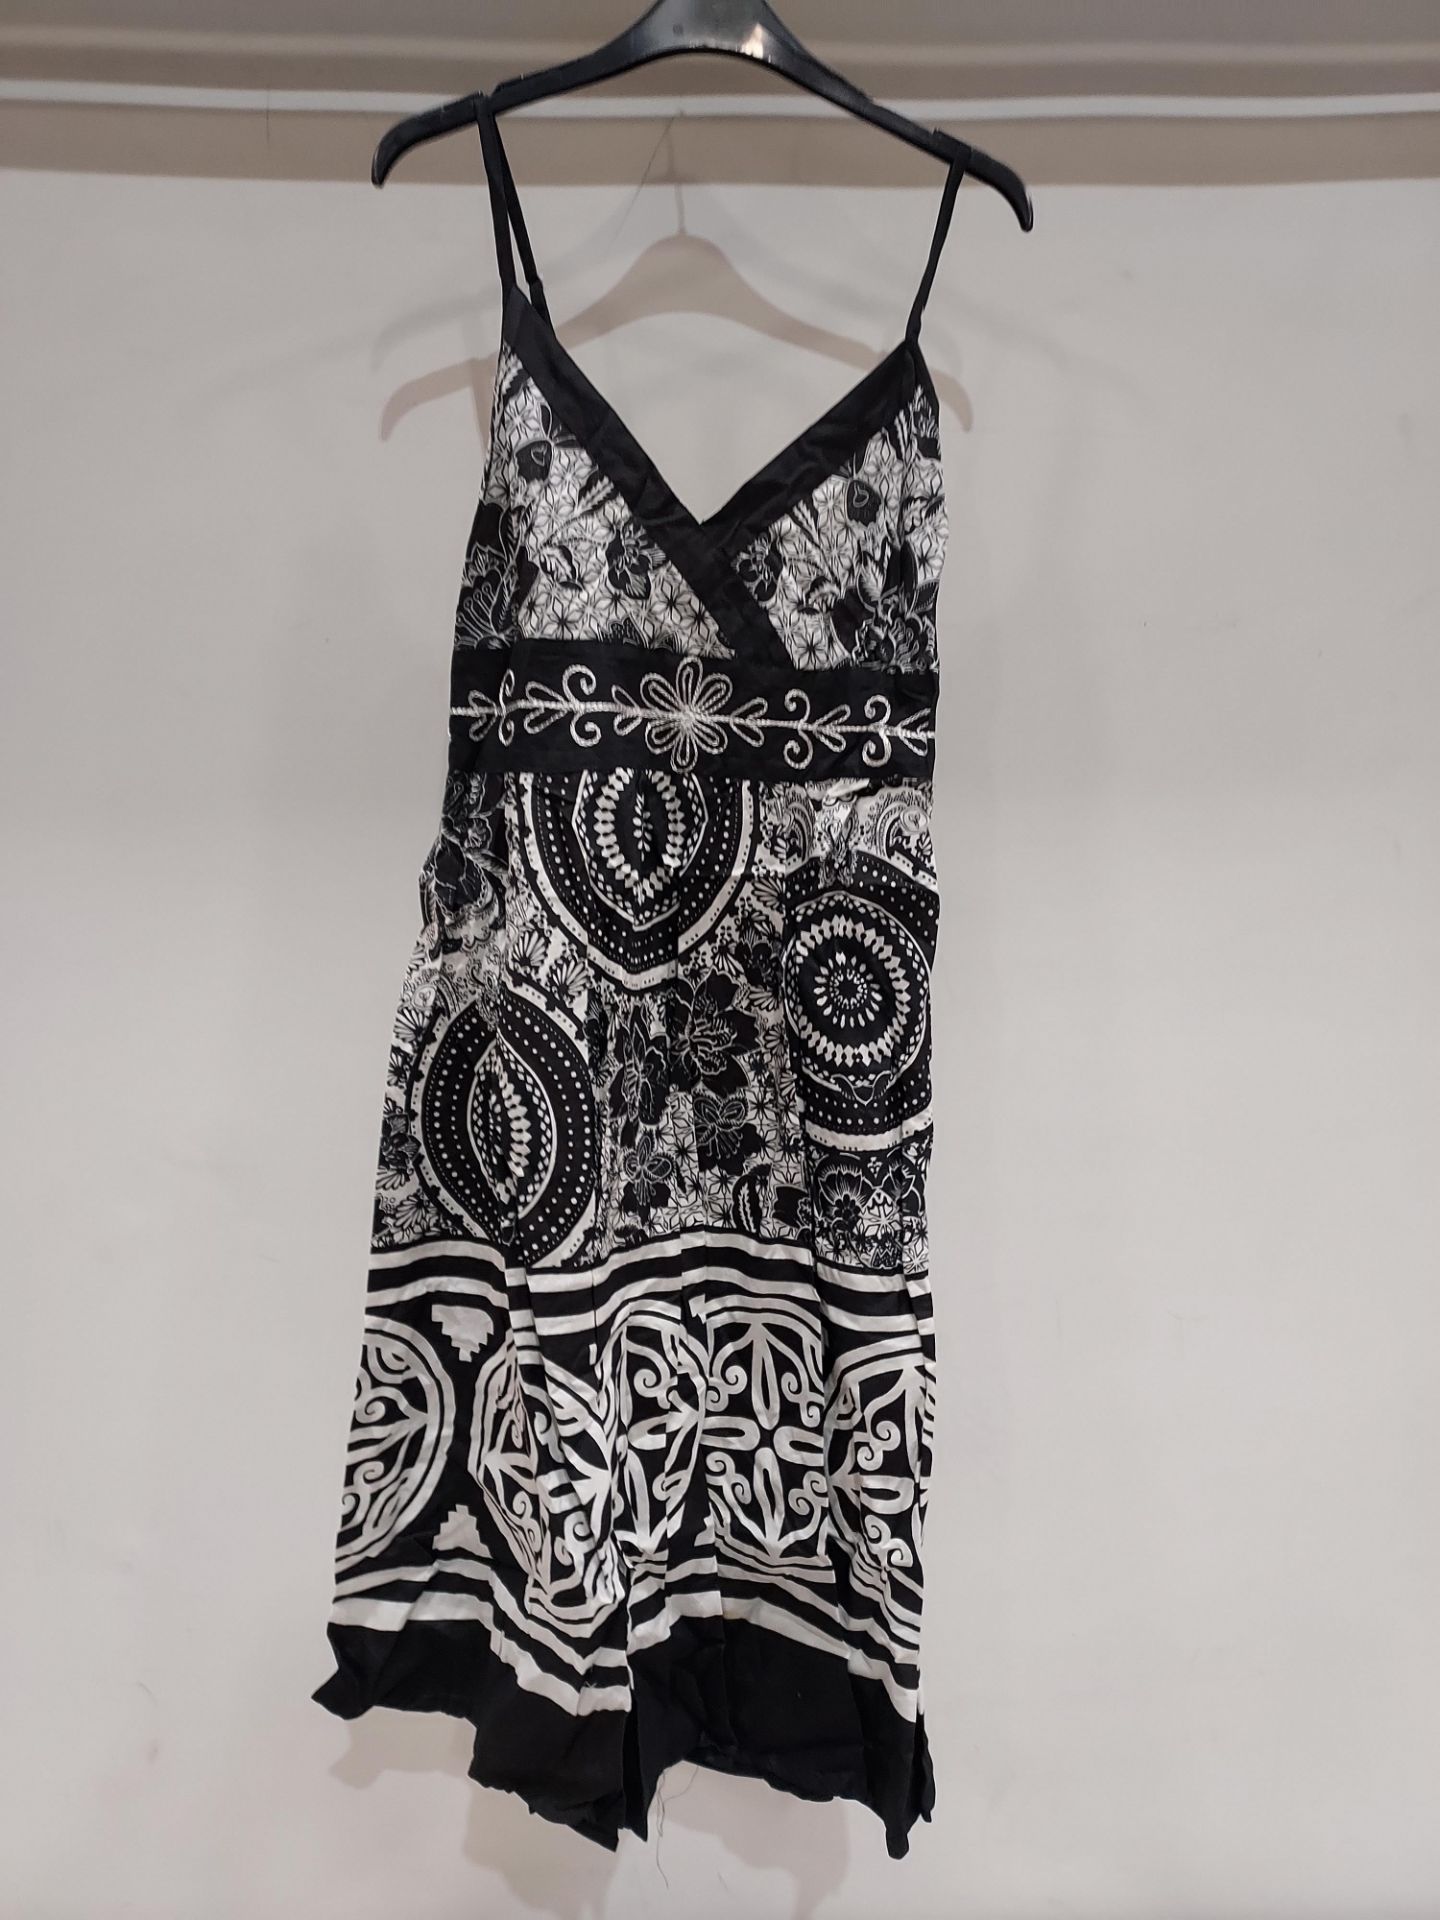 12 X BRAND NEW PISTACHIO SUMMER 2 IN 1 DRESSES IN BLACK/WHITE SIZE SMALL (RRP EACH £25 TOTAL RRP £